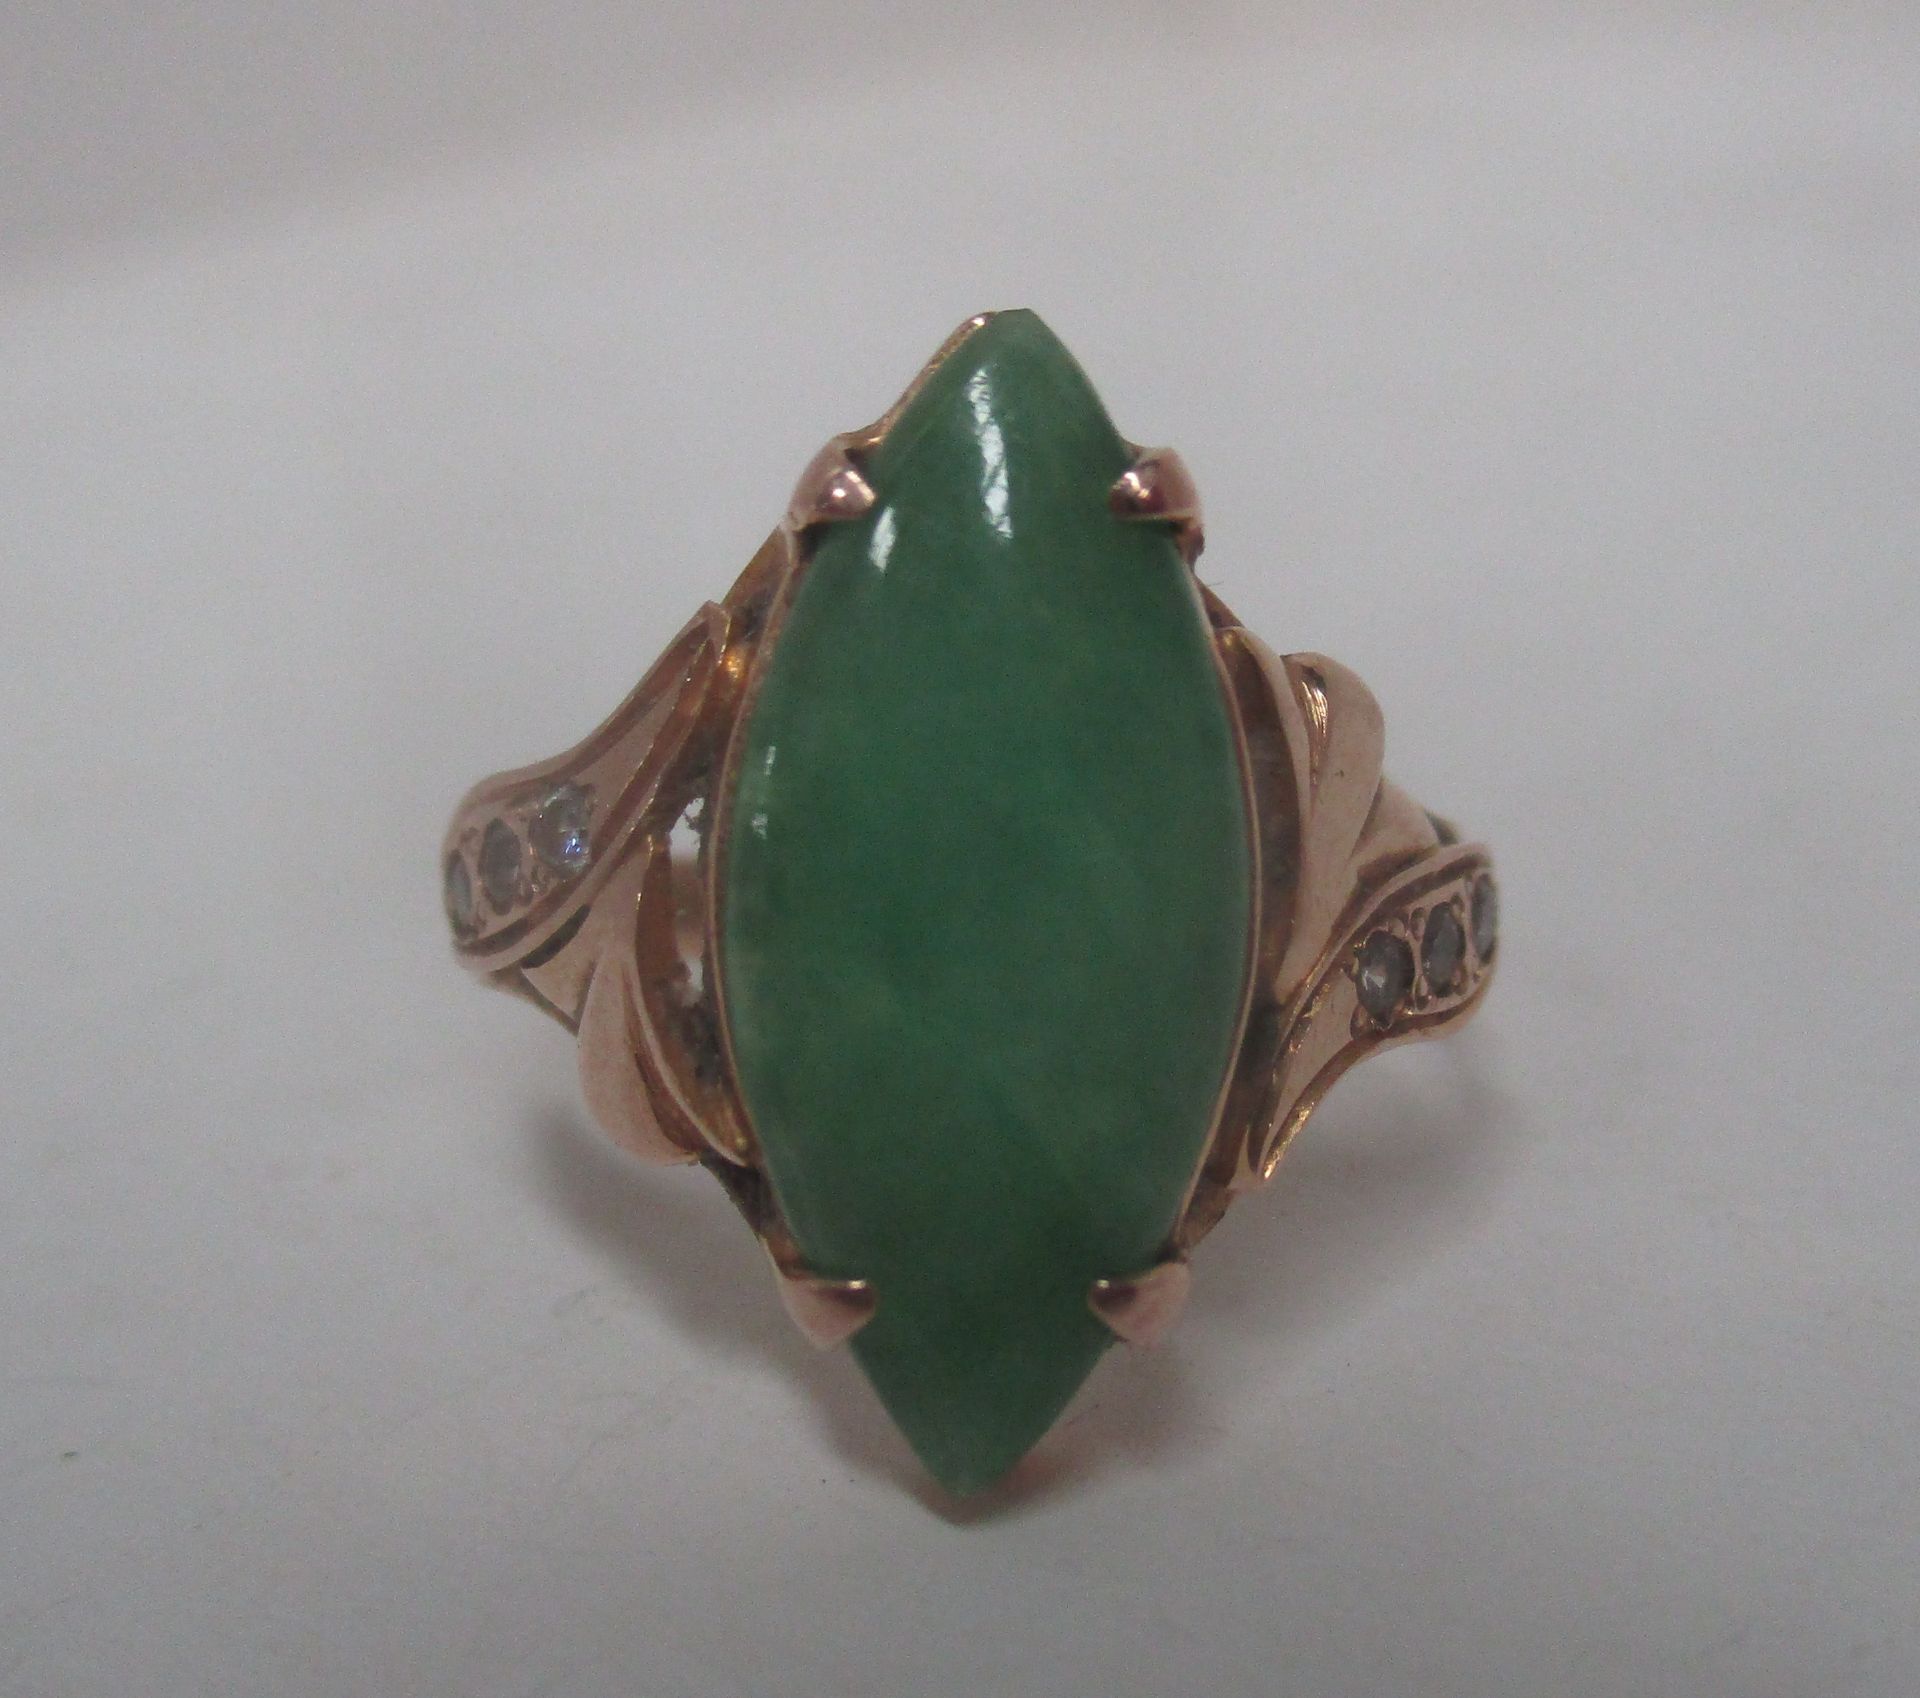 An 18ct yellow gold ring (unstamped) set with a large marquise shaped jade